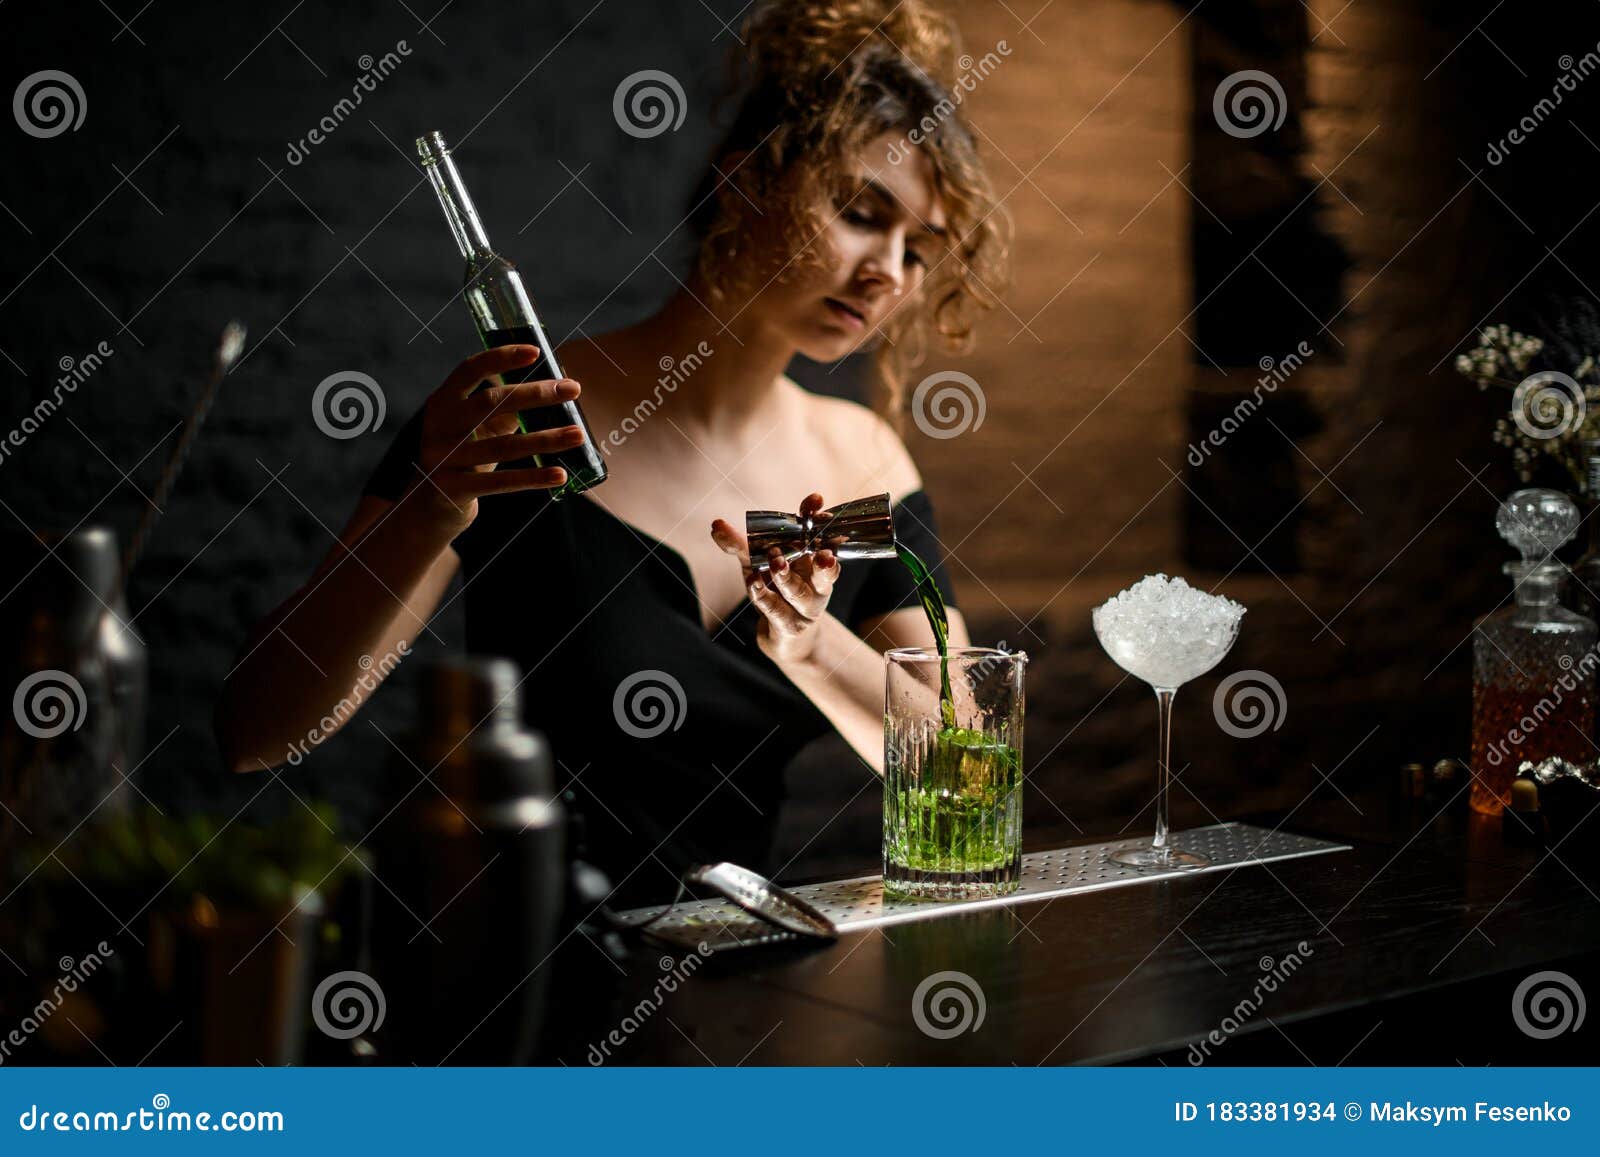 beautiful female bartender professionally pours blue drink from jigger into cup.